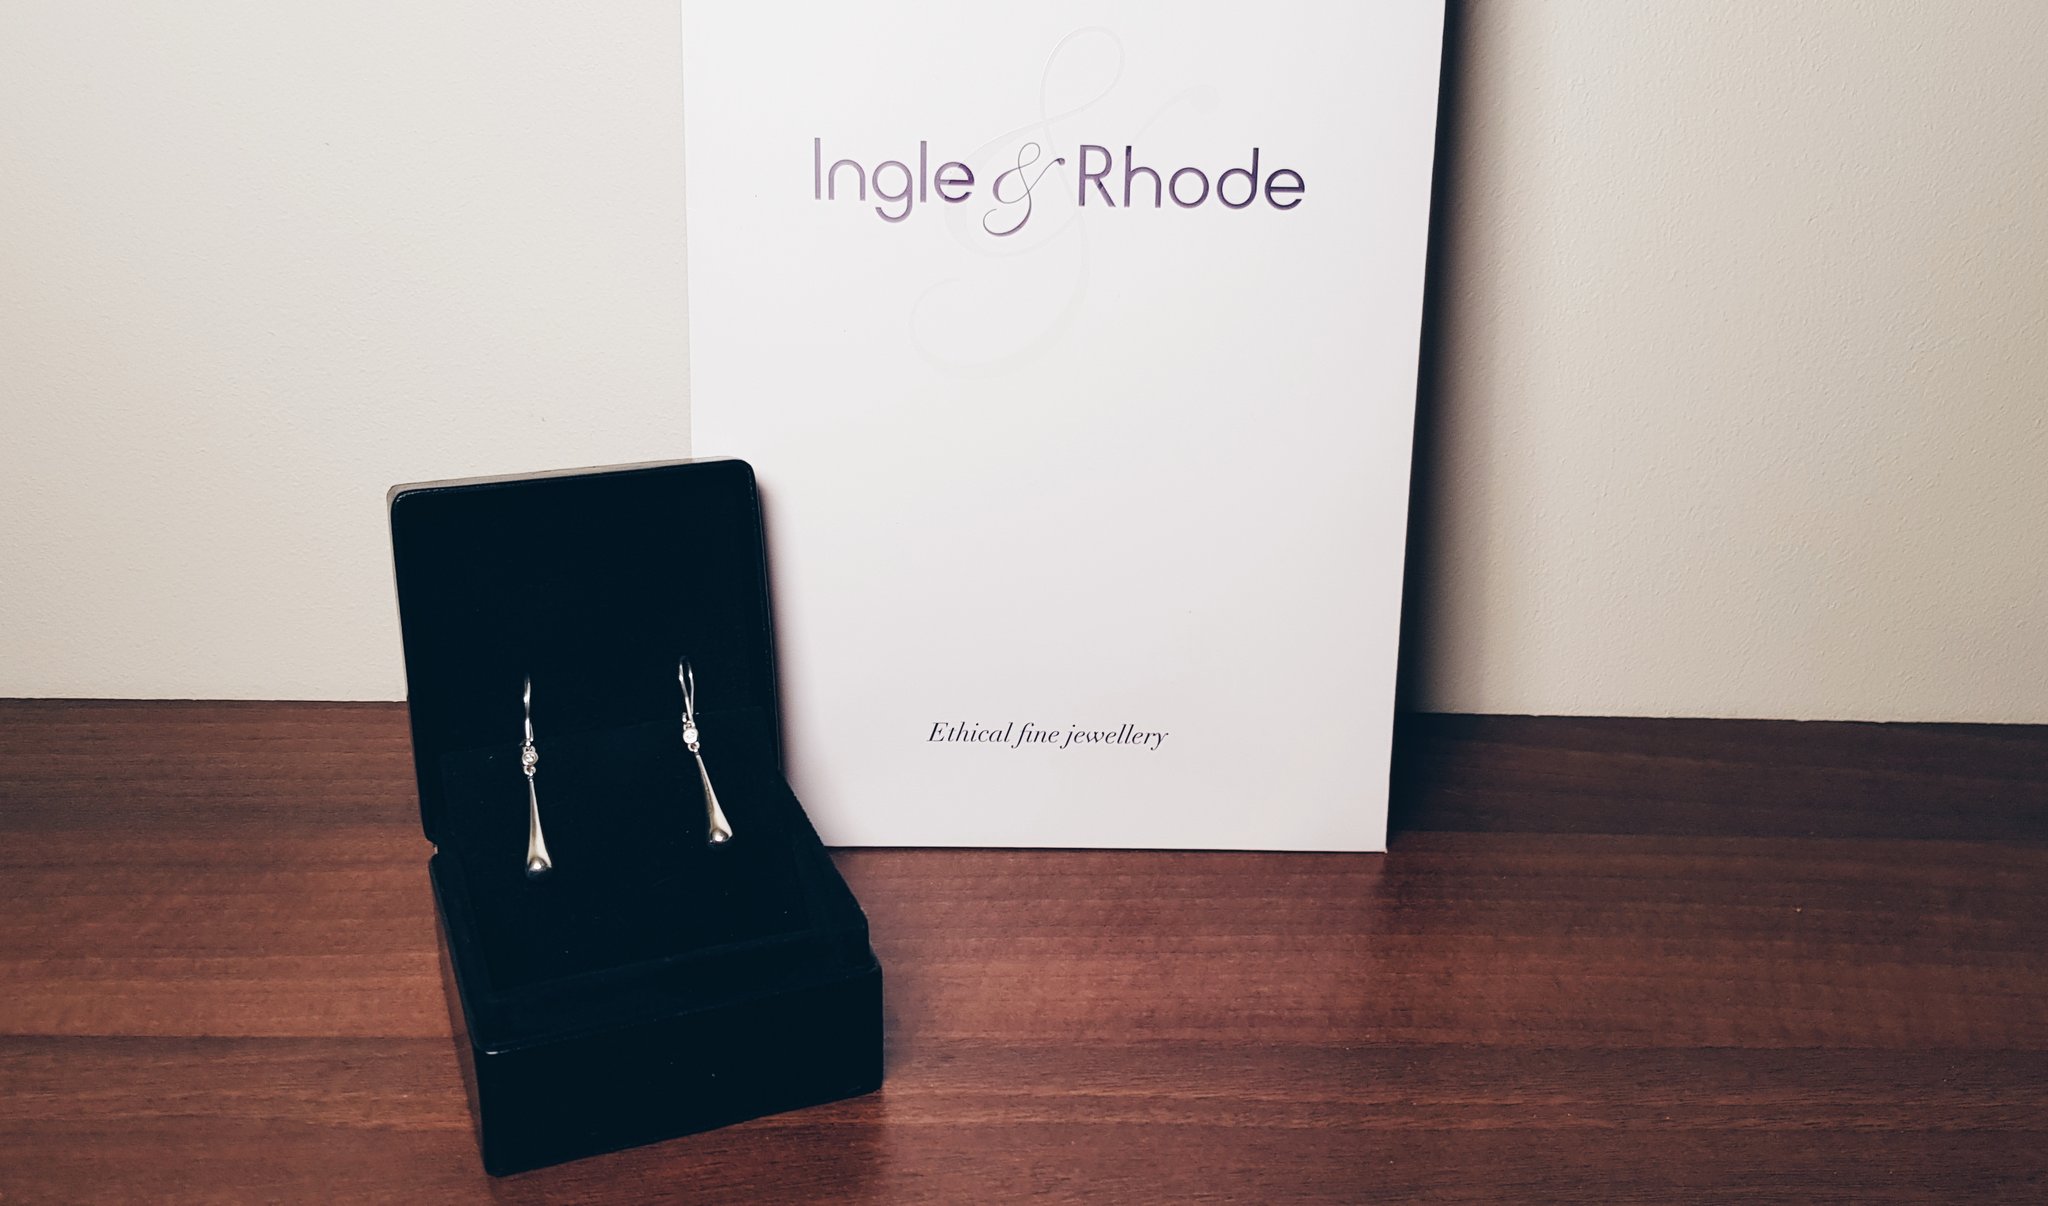 Shine bright with the Ingle & Rhode silver and engagement ring collection - Droplet Earrings